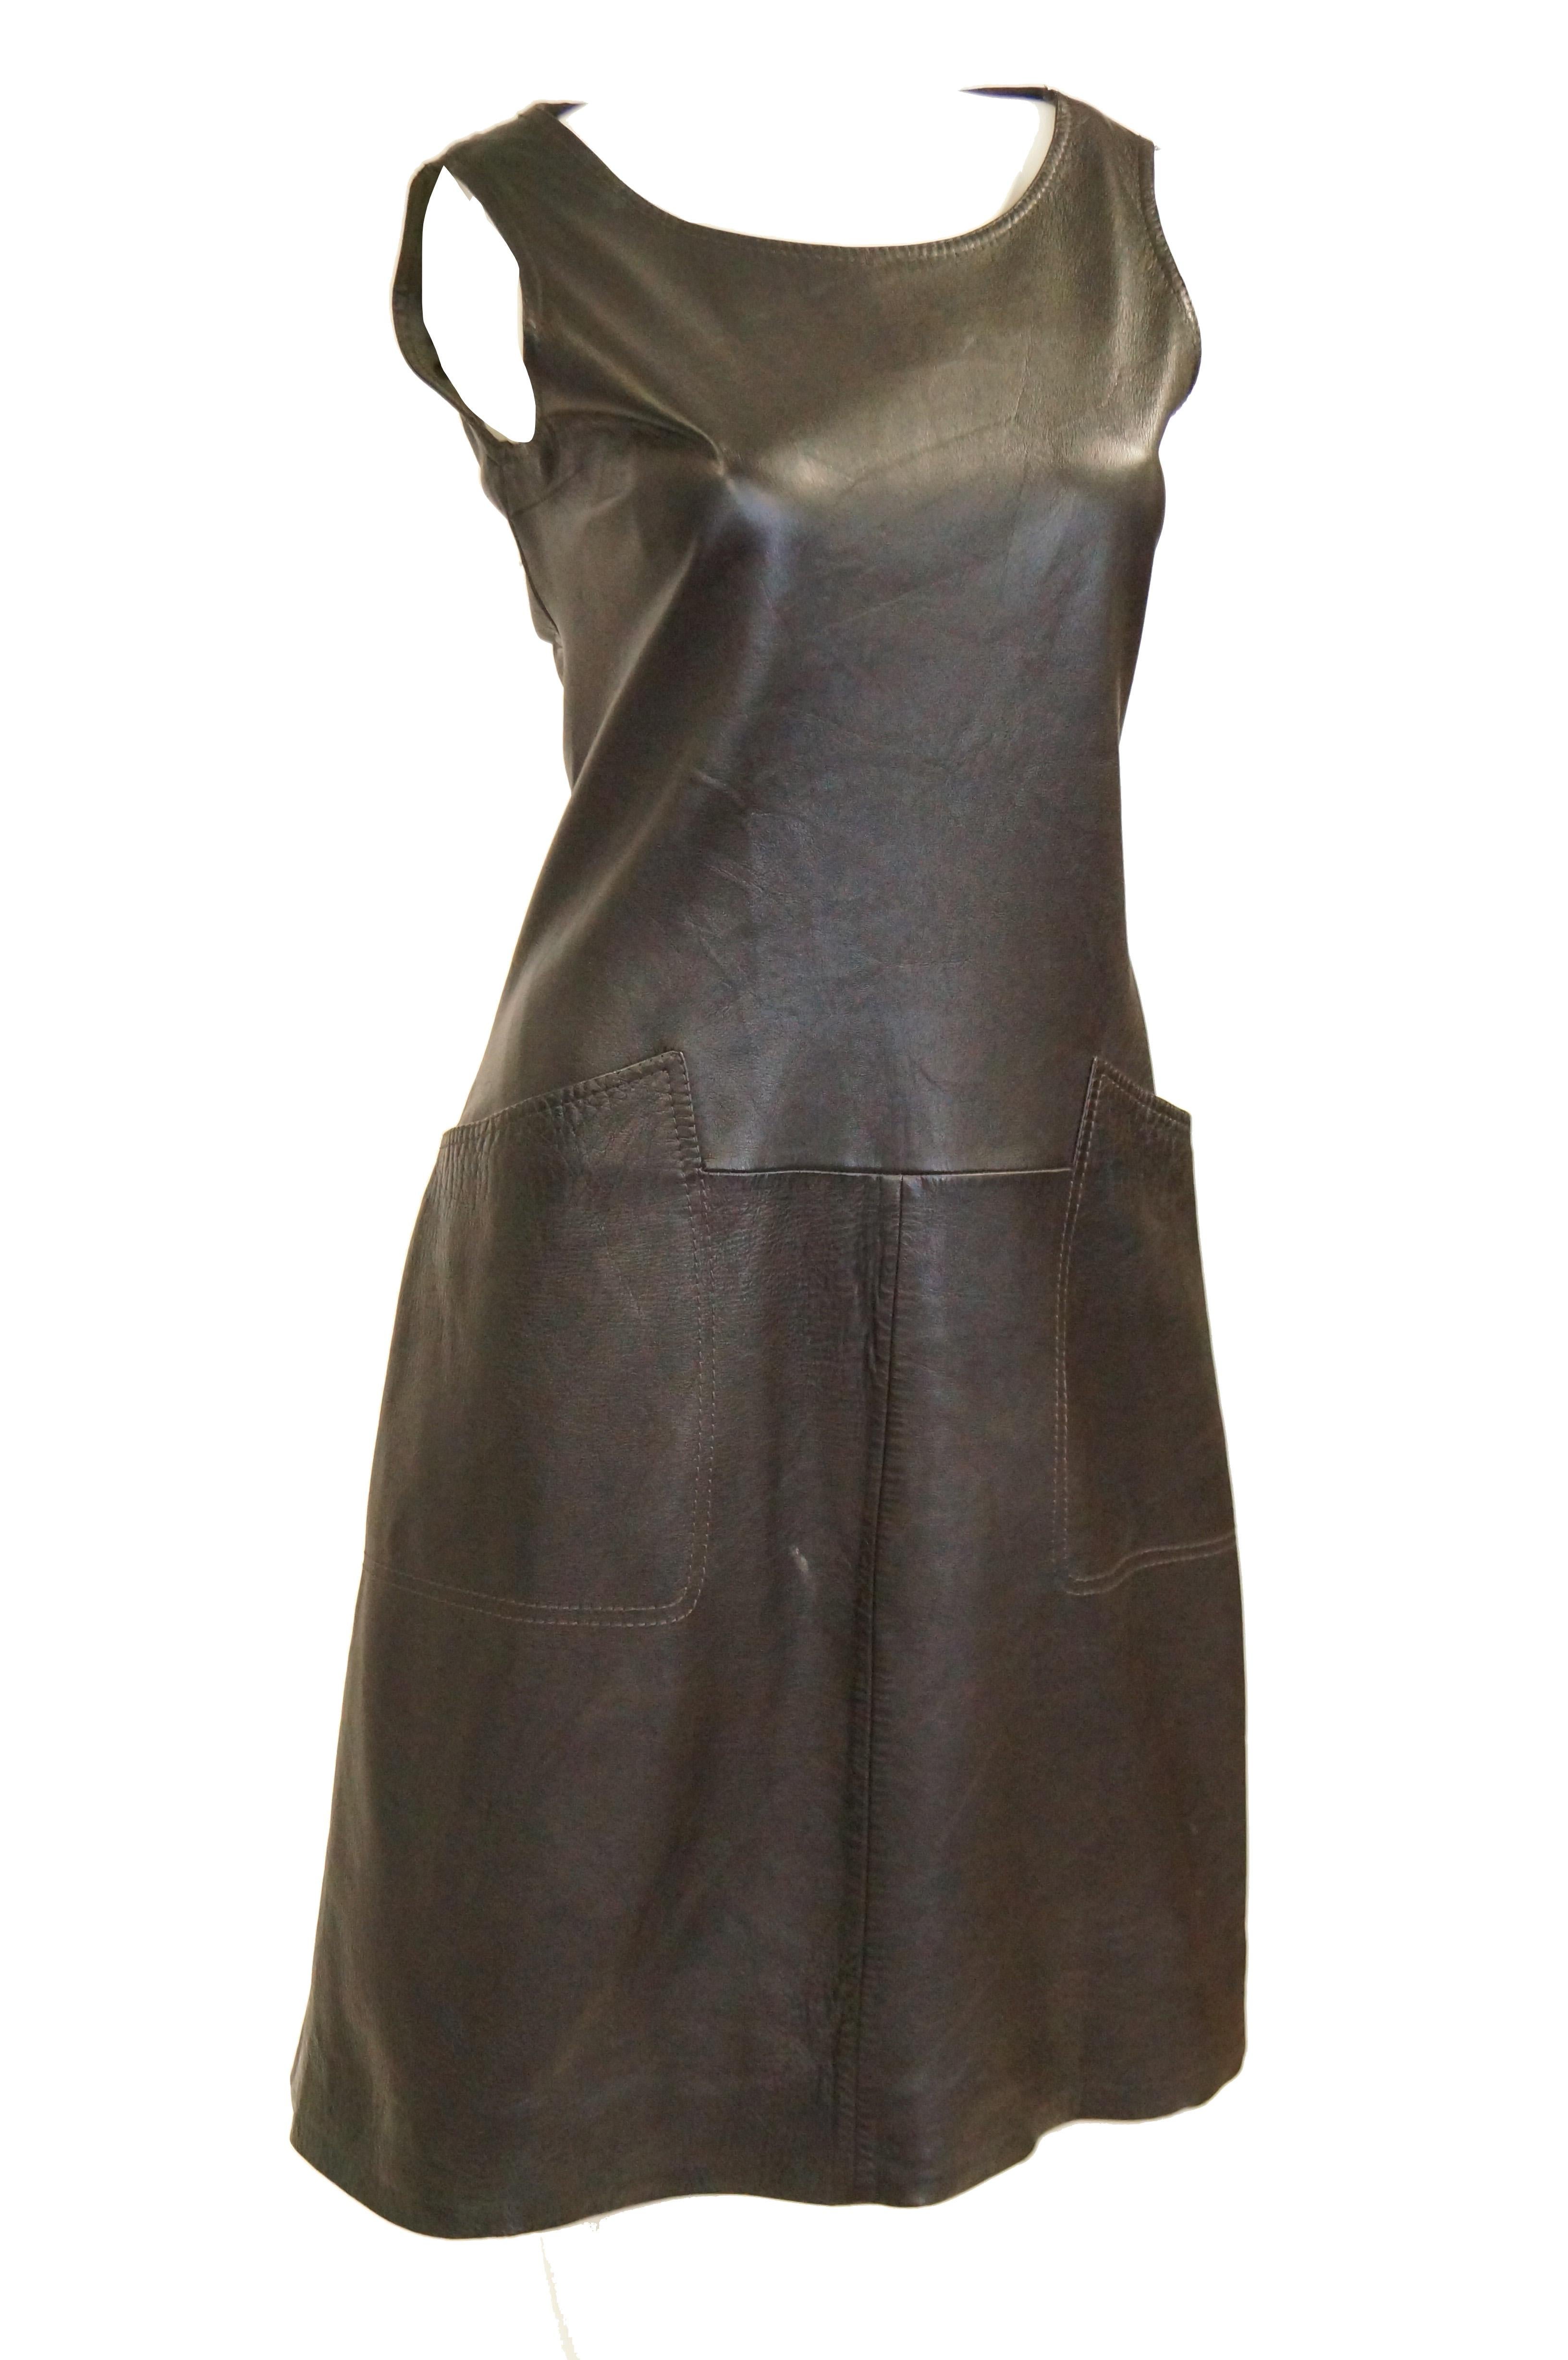 Buttery soft lambskin dress in espresso brown. The shift dress is knee length, sleeveless, and has a wide, round neckline. The dress features square pockets, with seams that blend into the waist structure of the dress. Wear with a white turtleneck